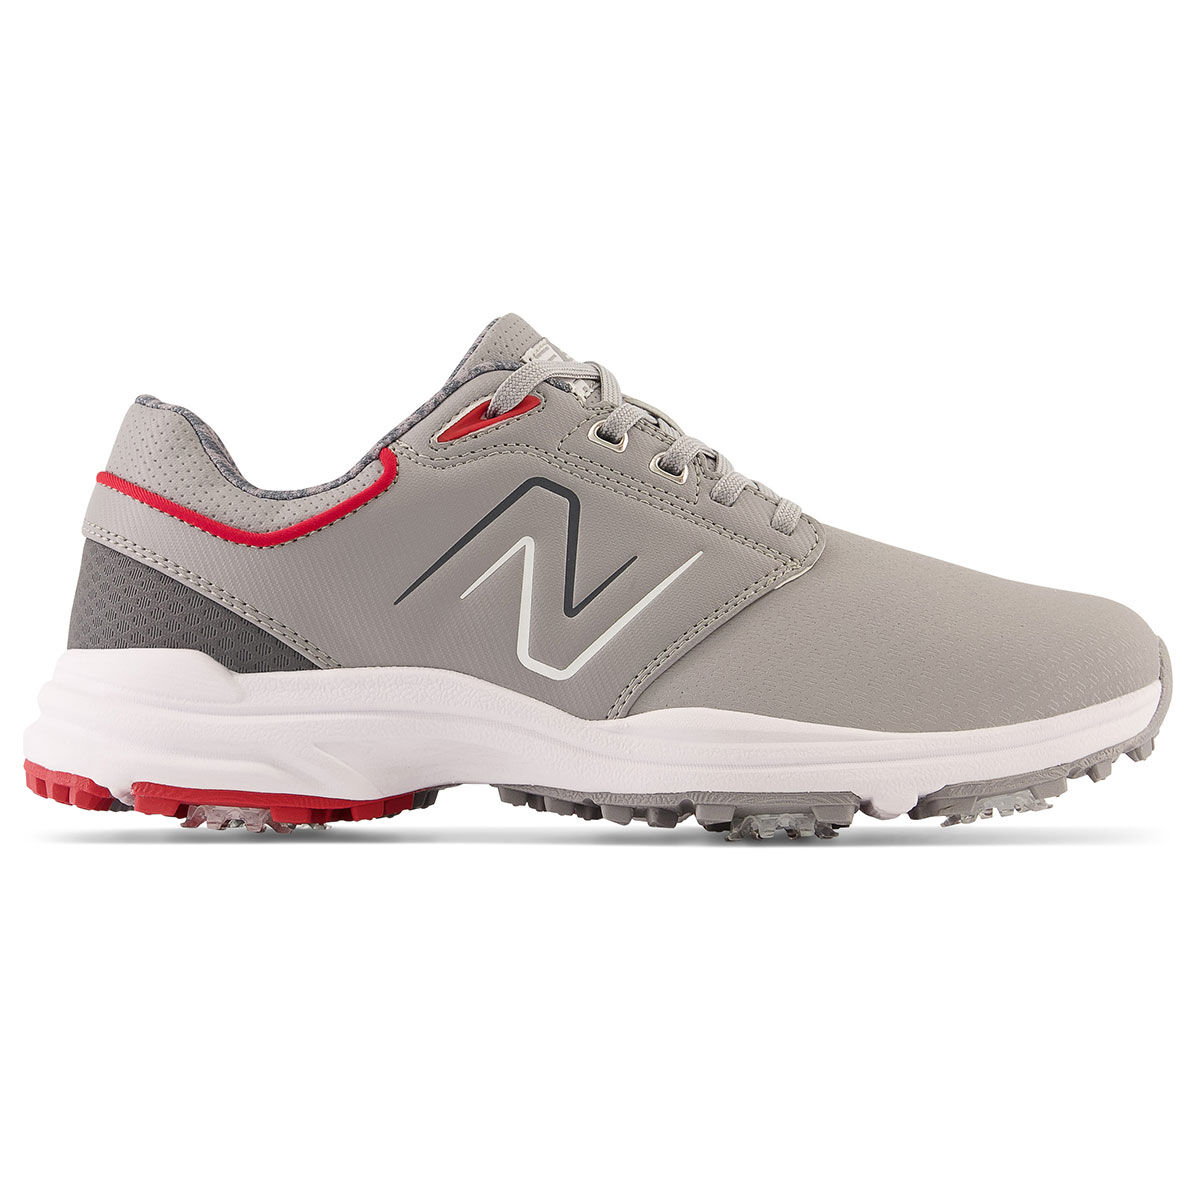 New Balance Men’s Grey Waterproof Brighton Spiked Golf Shoes, Size: 7.5 | American Golf